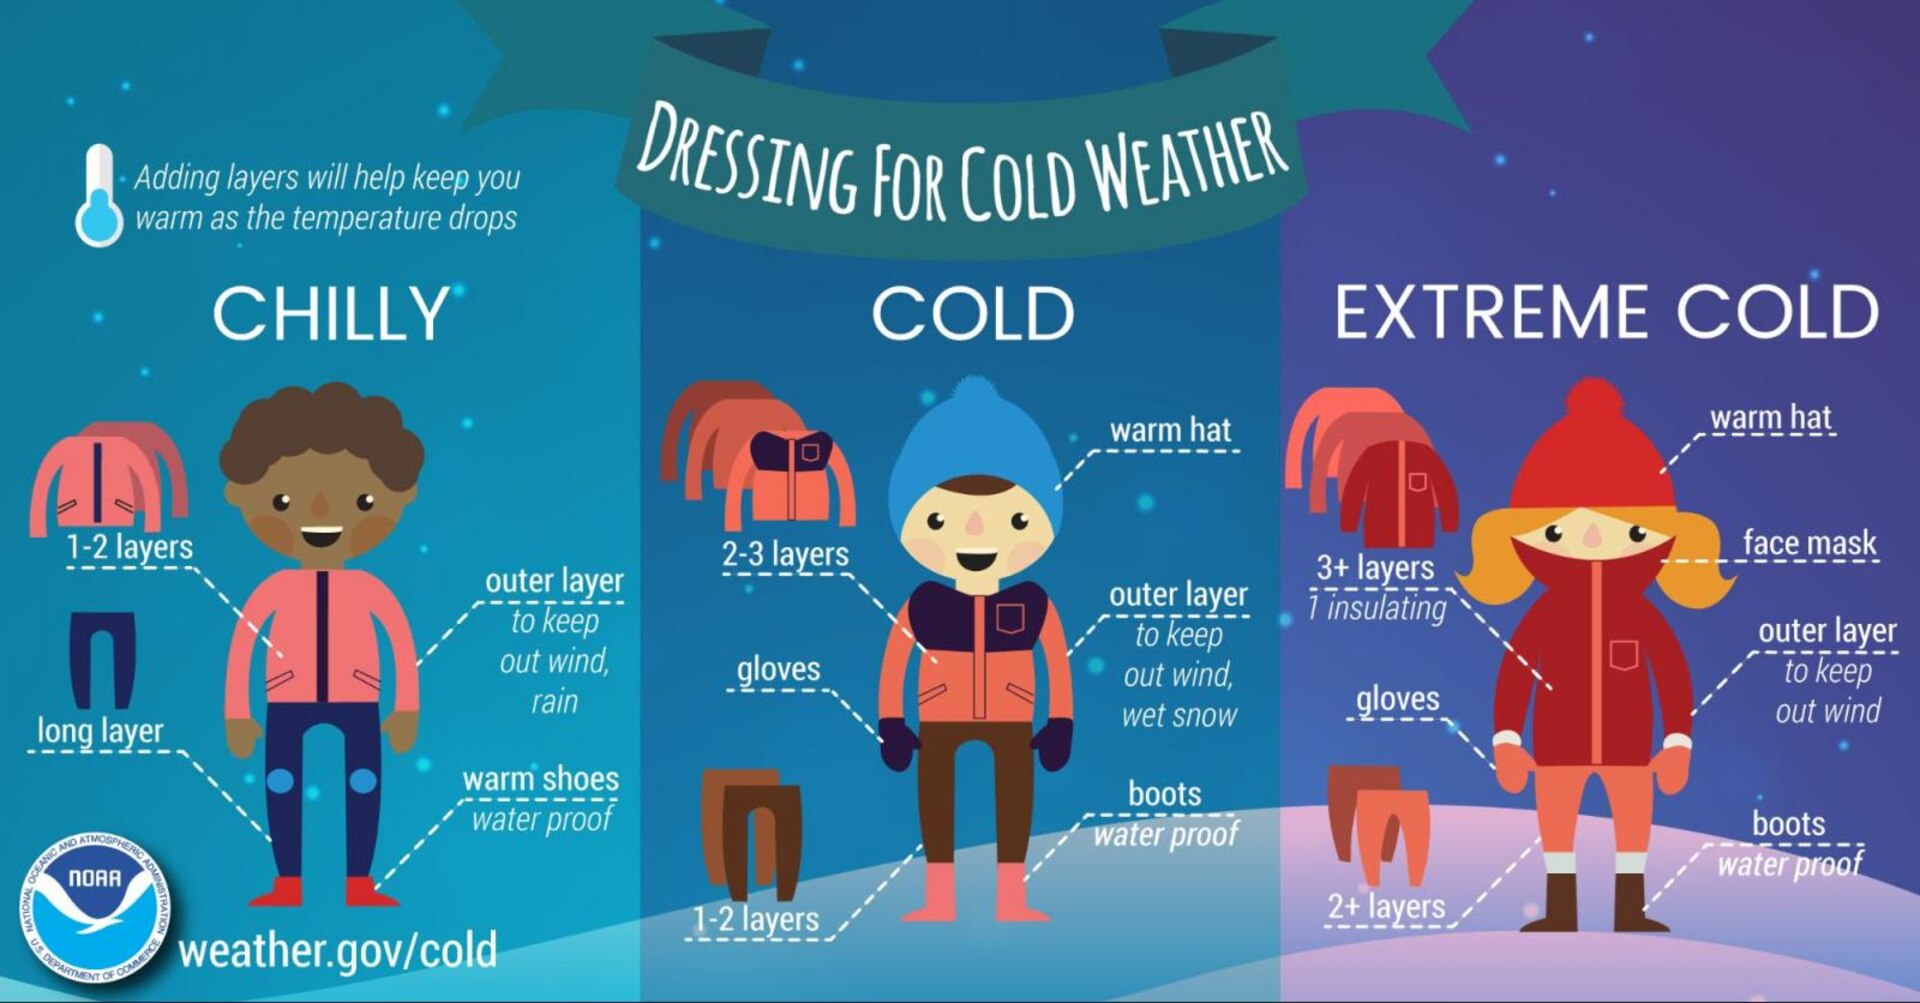 If going outside, wear several layers of loose fitting, lightweight, warm clothing rather than one layer of heavy clothing.